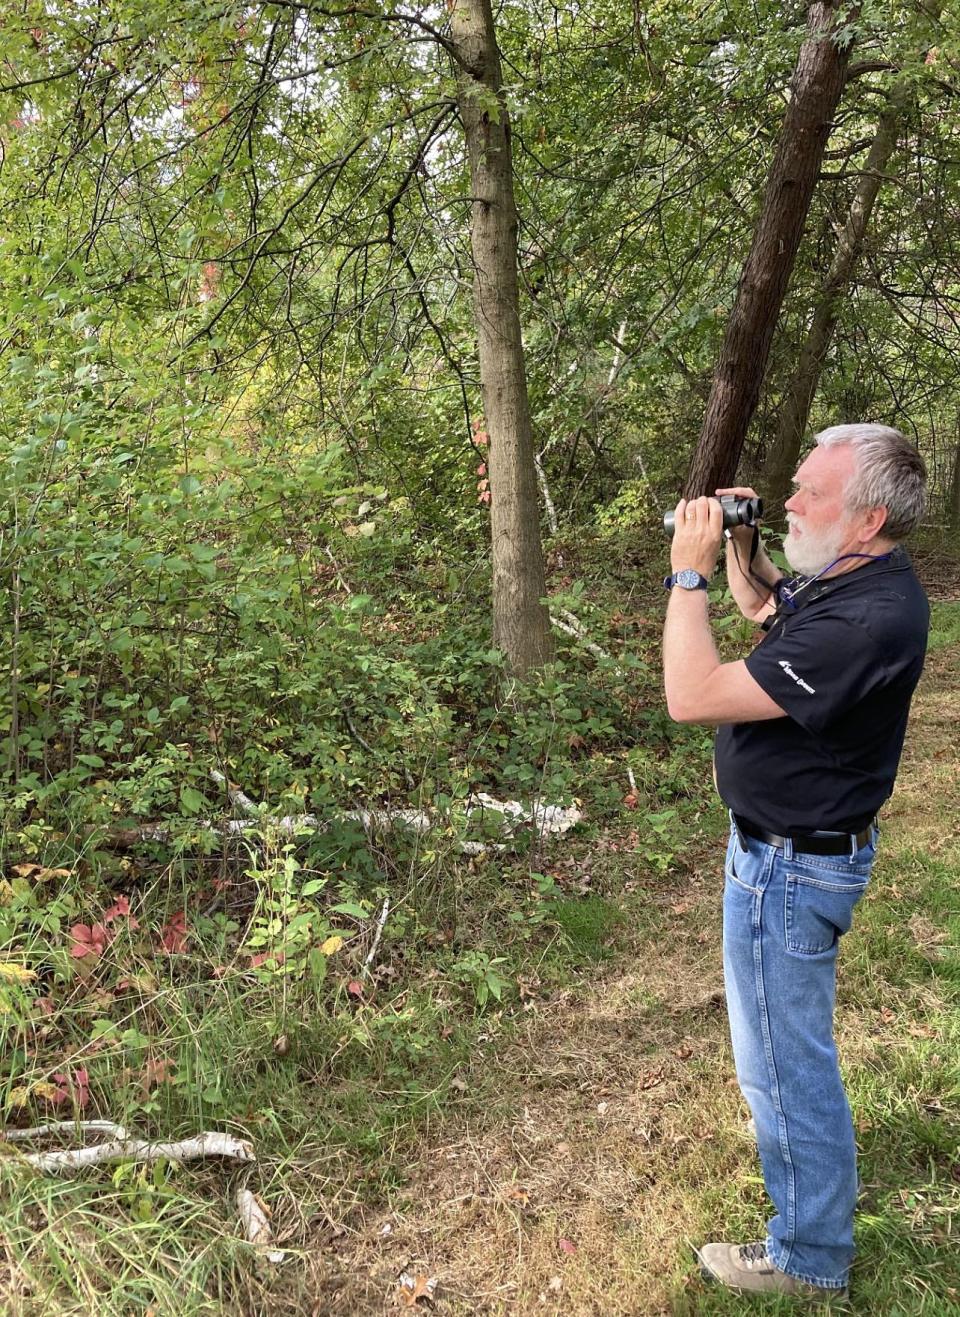 Jerry McWilliams searches for birds while walking the trails at Presque Isle State Park on Oct. 12. McWilliams, 70, has bird watched on the peninsula for nearly 50 years.